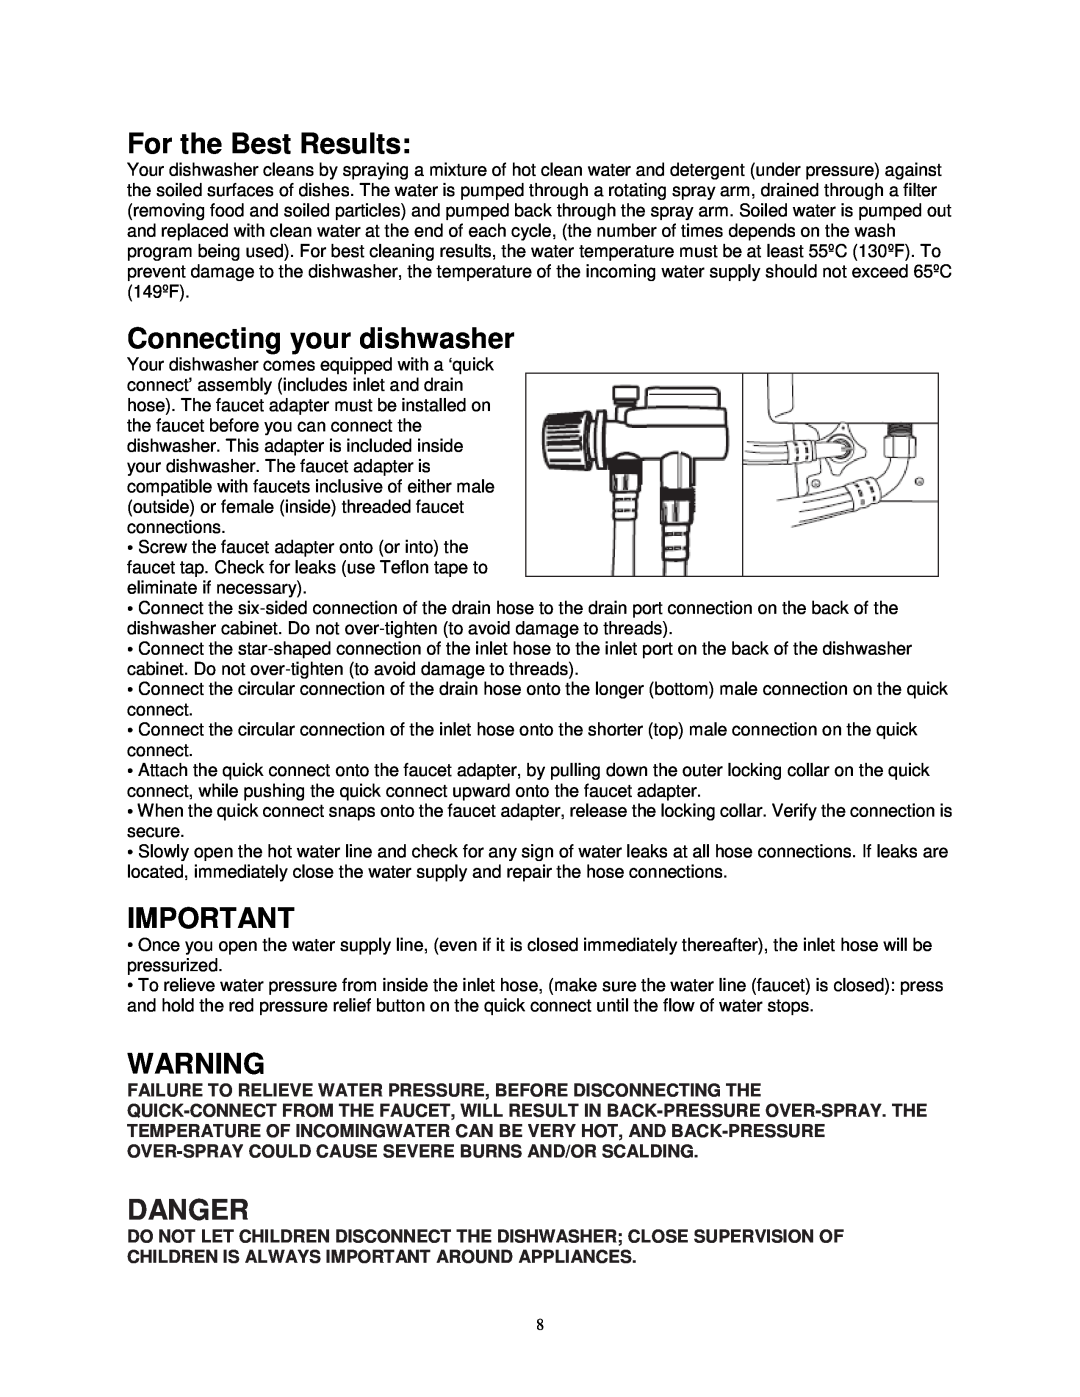 Avanti DW6PS, DW6W instruction manual For the Best Results, Connecting your dishwasher, Danger 